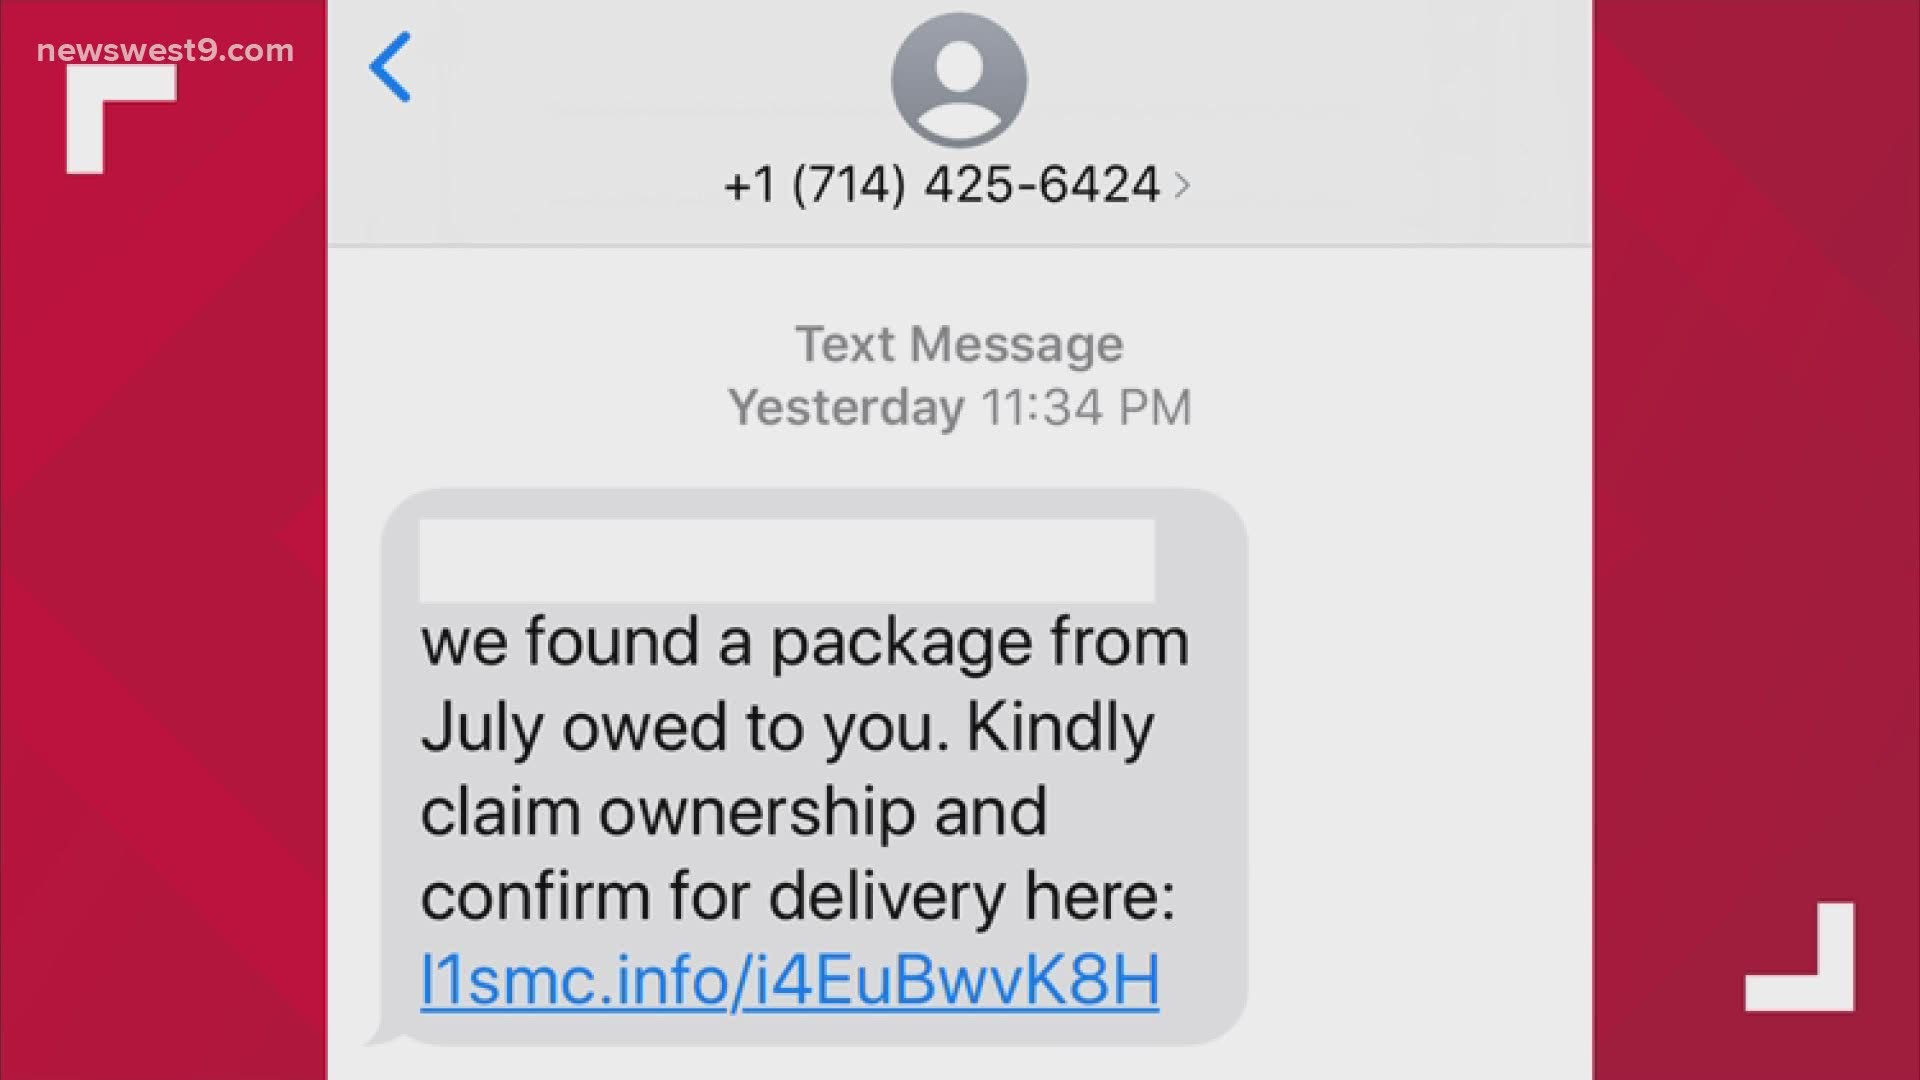 Midland County Sheriff's Office warns of scam involving text messages